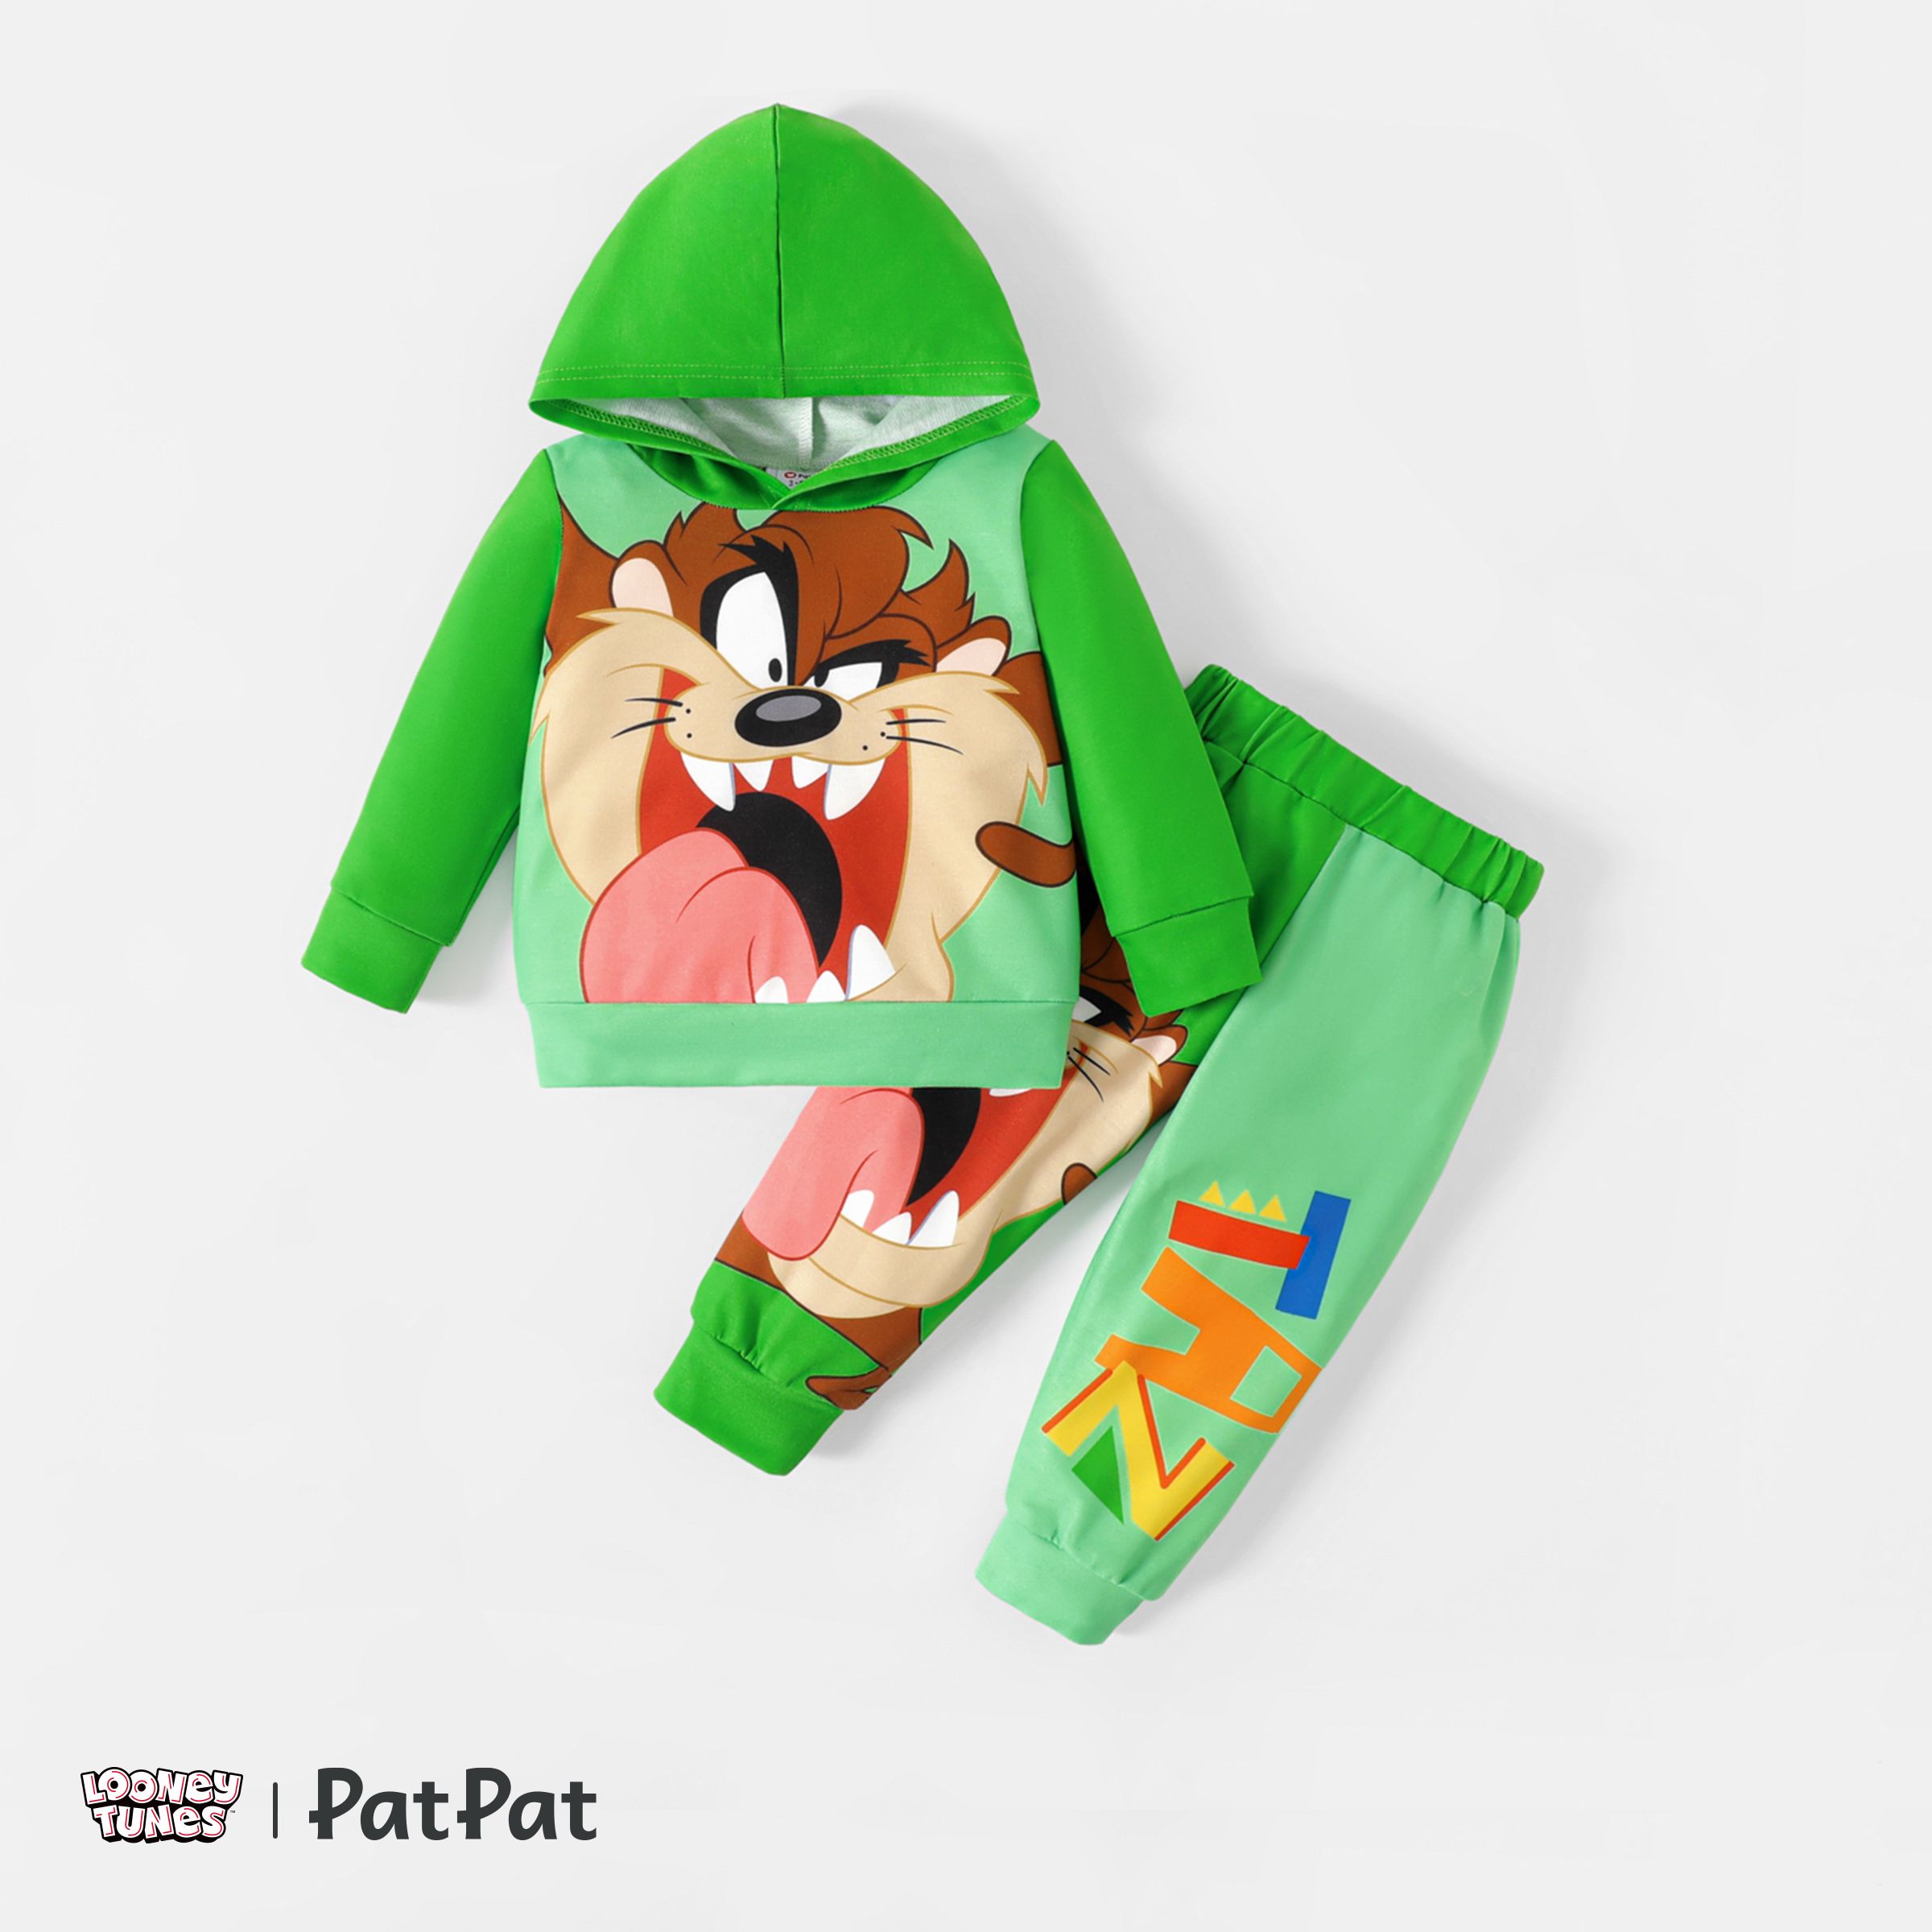 Looney Tunes Baby Boy/Girl Colorblock Long-sleeve Graphic Jumpsuit